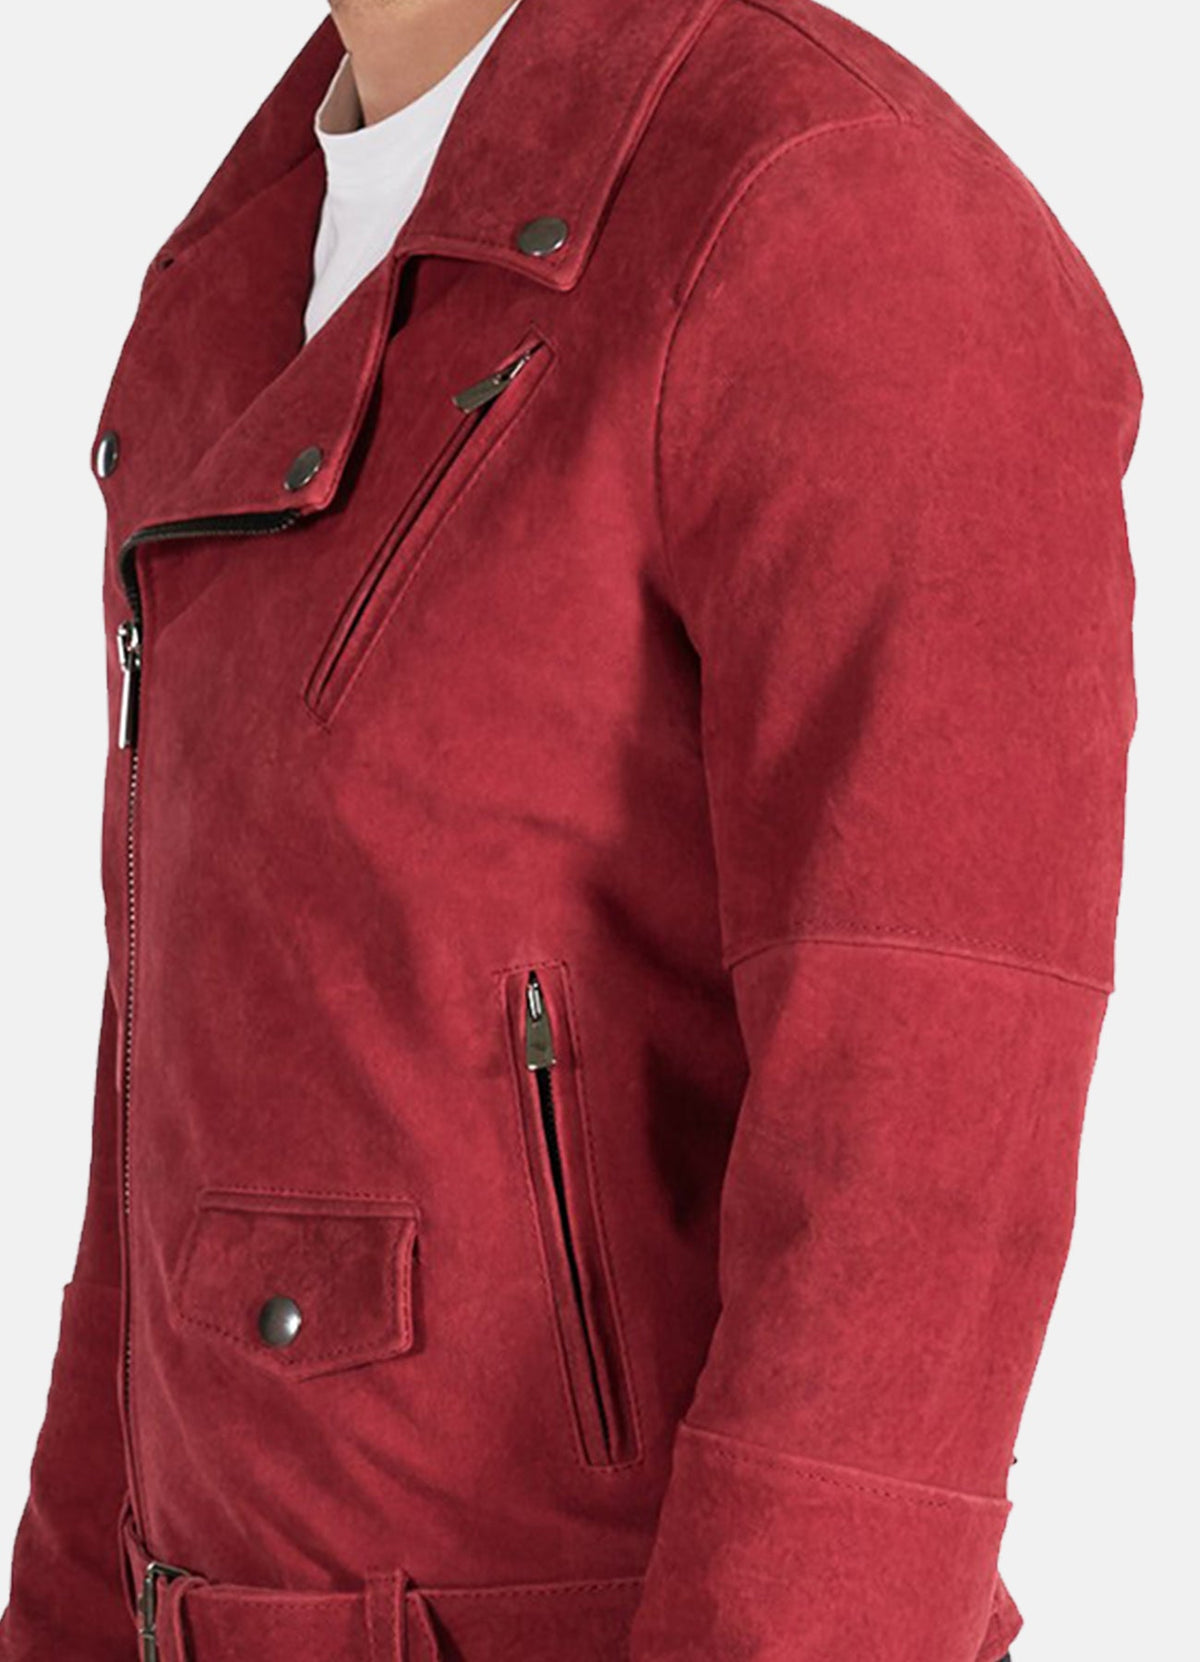 Mens Bright Red Suede Leather Jacket